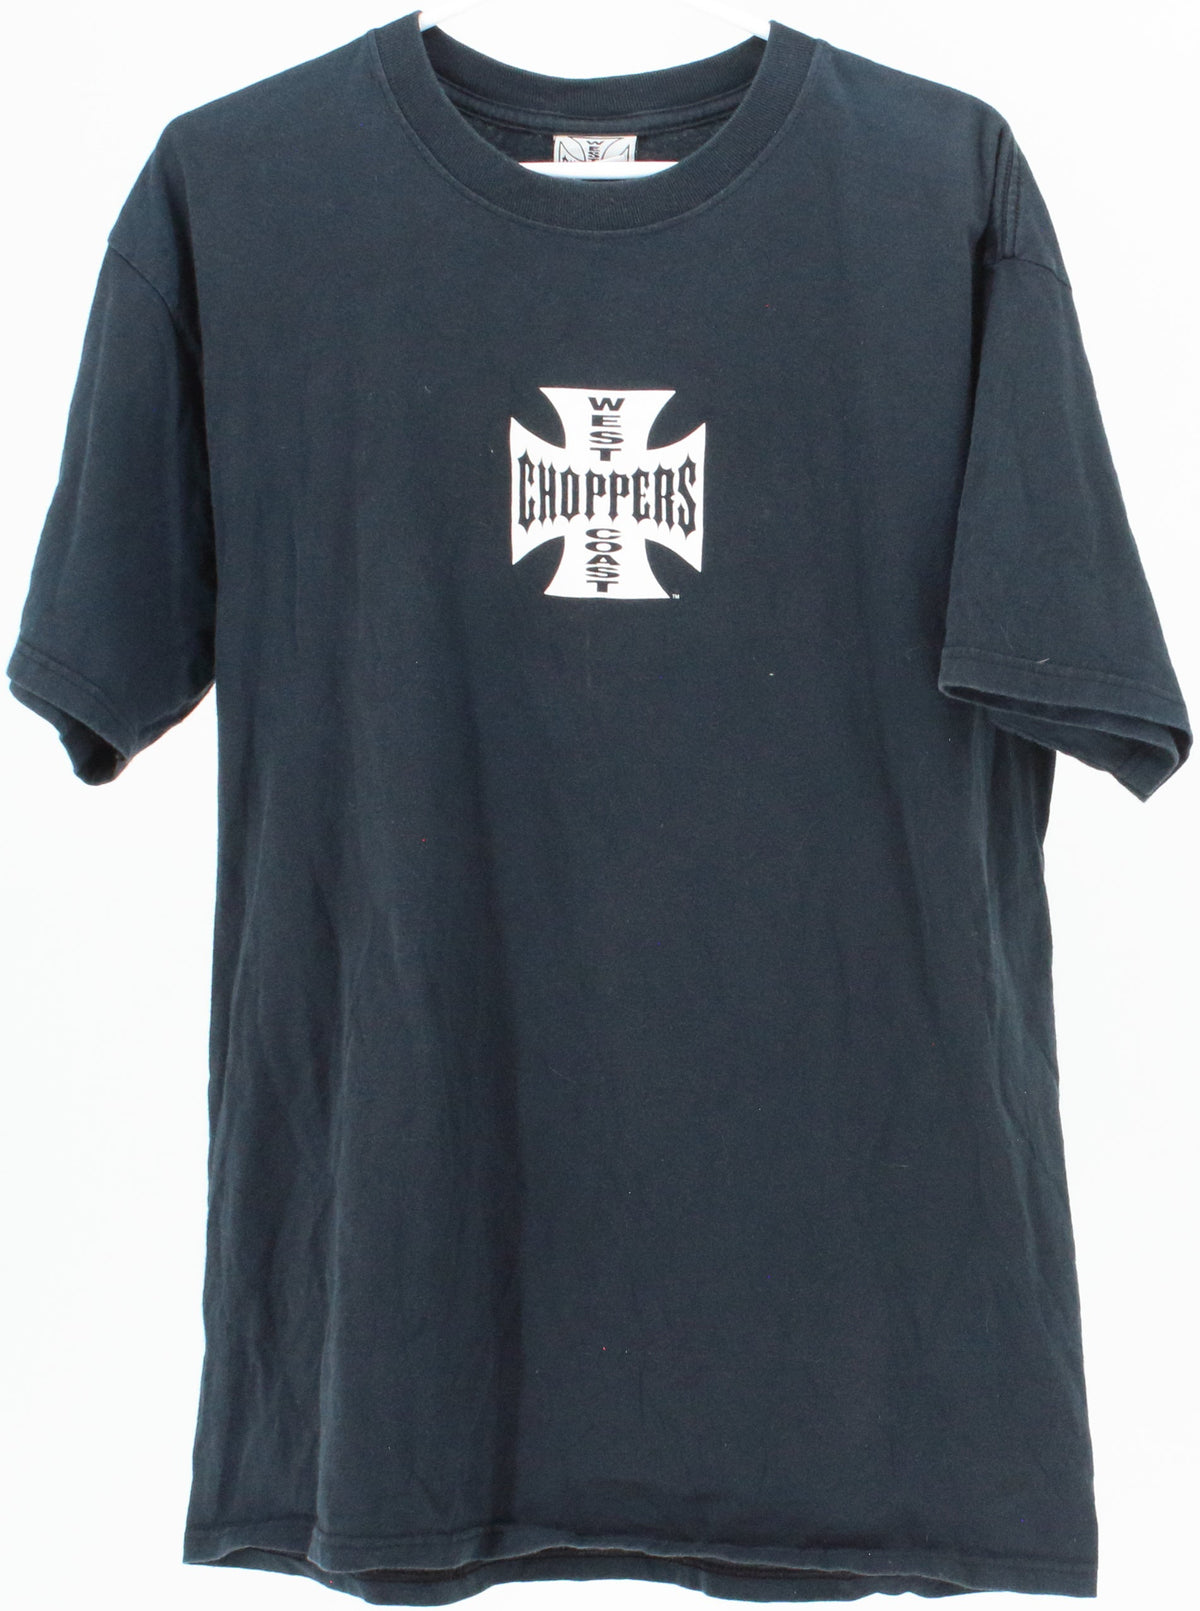 West Coast Choppers Black and White T-Shirt